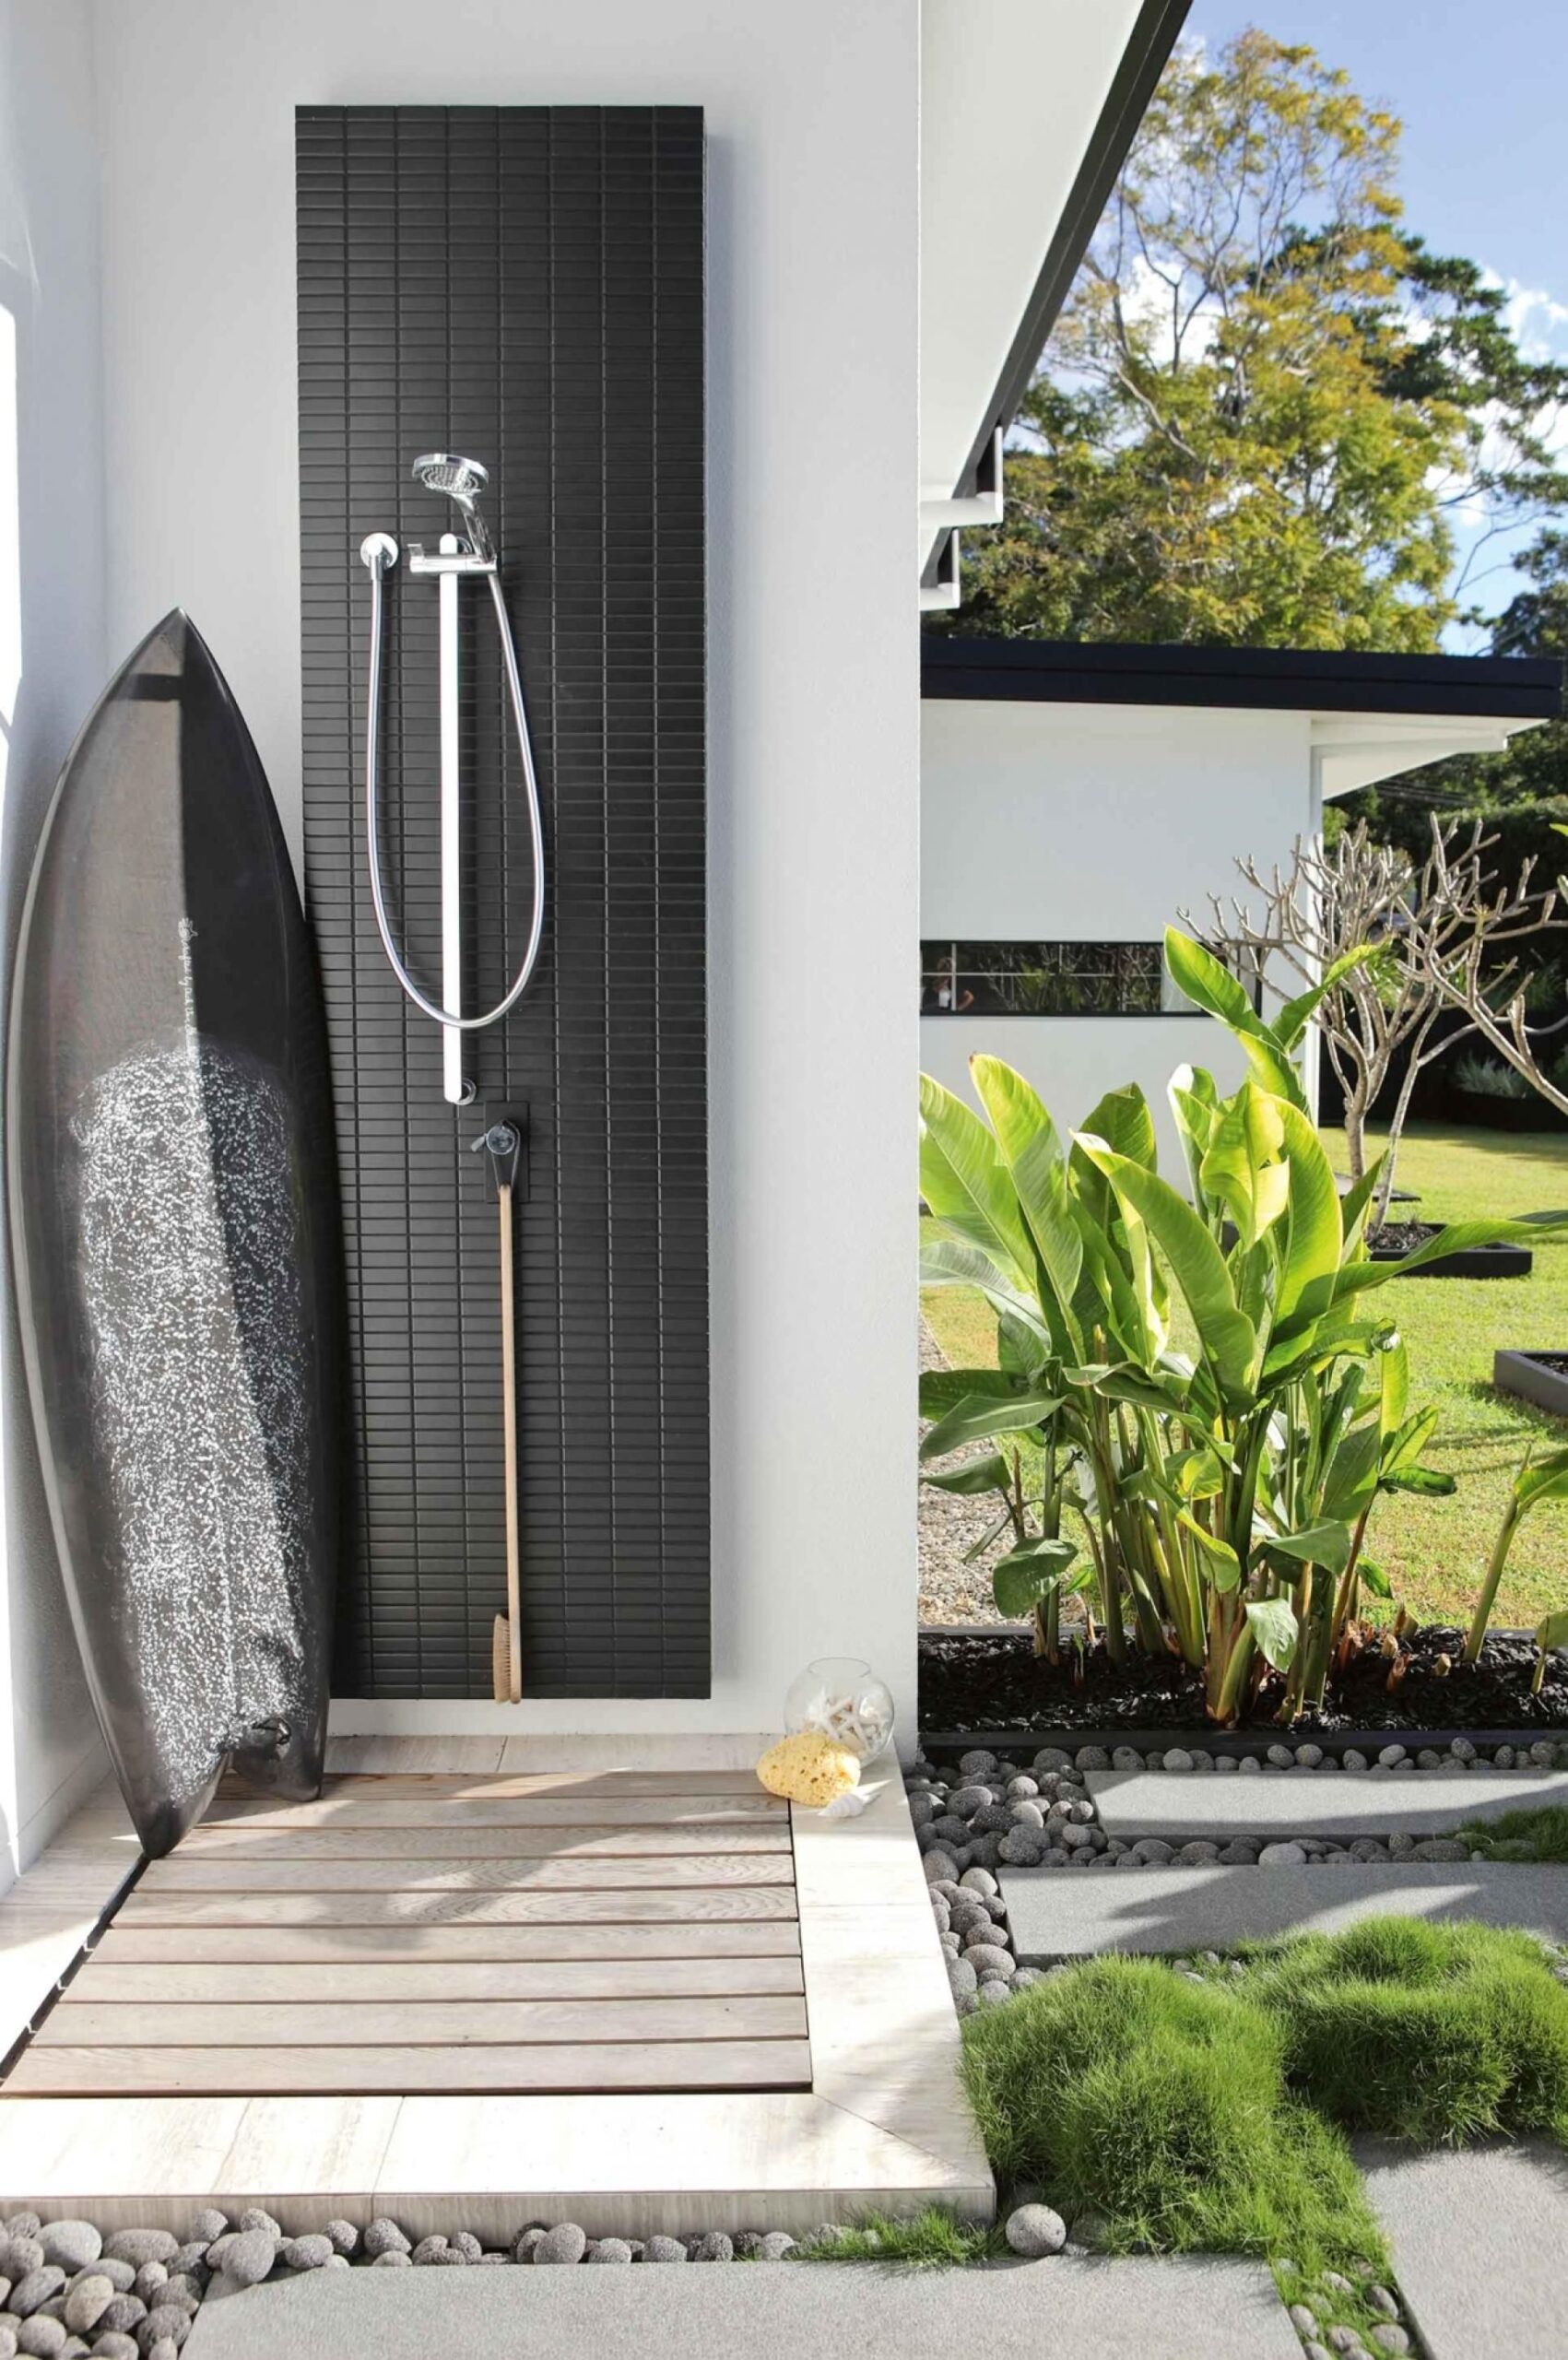 This beachy outdoor shower is built into the home in a secluded corner. #backyard inspiration via www.L-2-Design.com